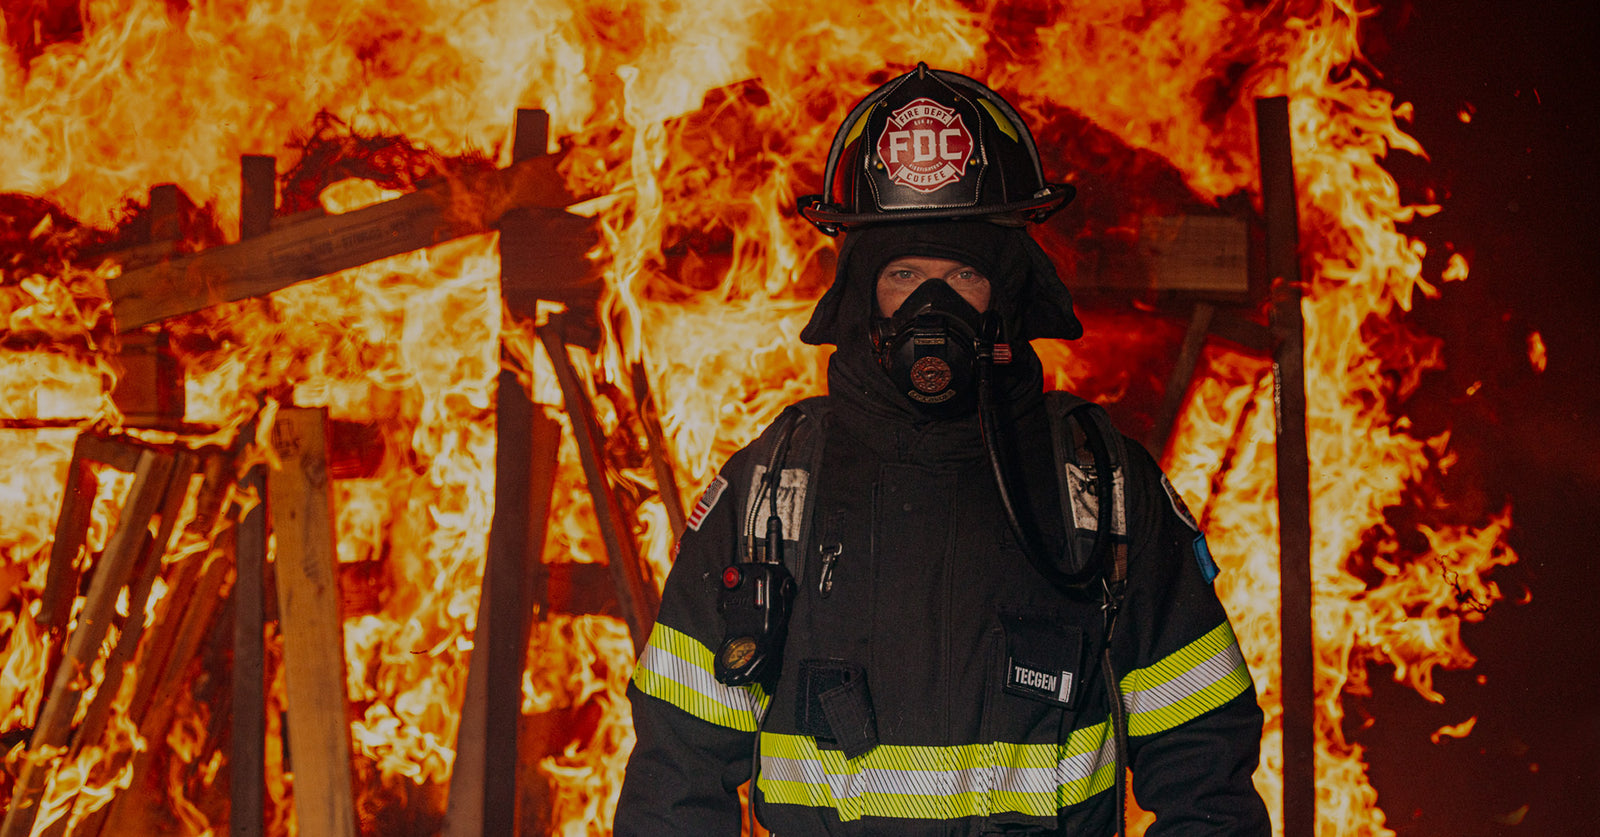 Firefighter standing in a burning structure.